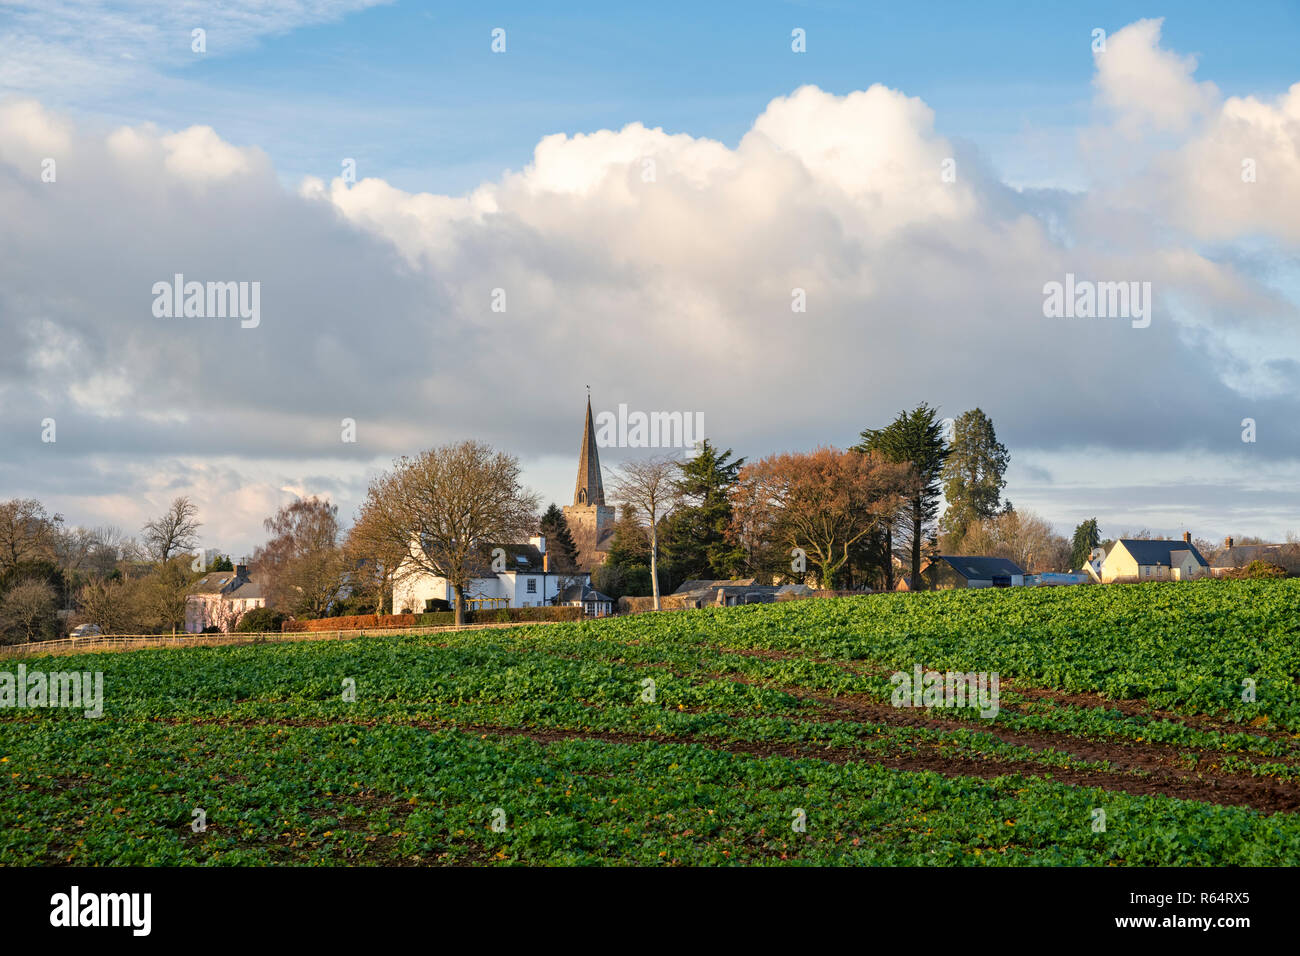 Das Dorf Trellech in Monmouthshire, South Wales. Stockfoto